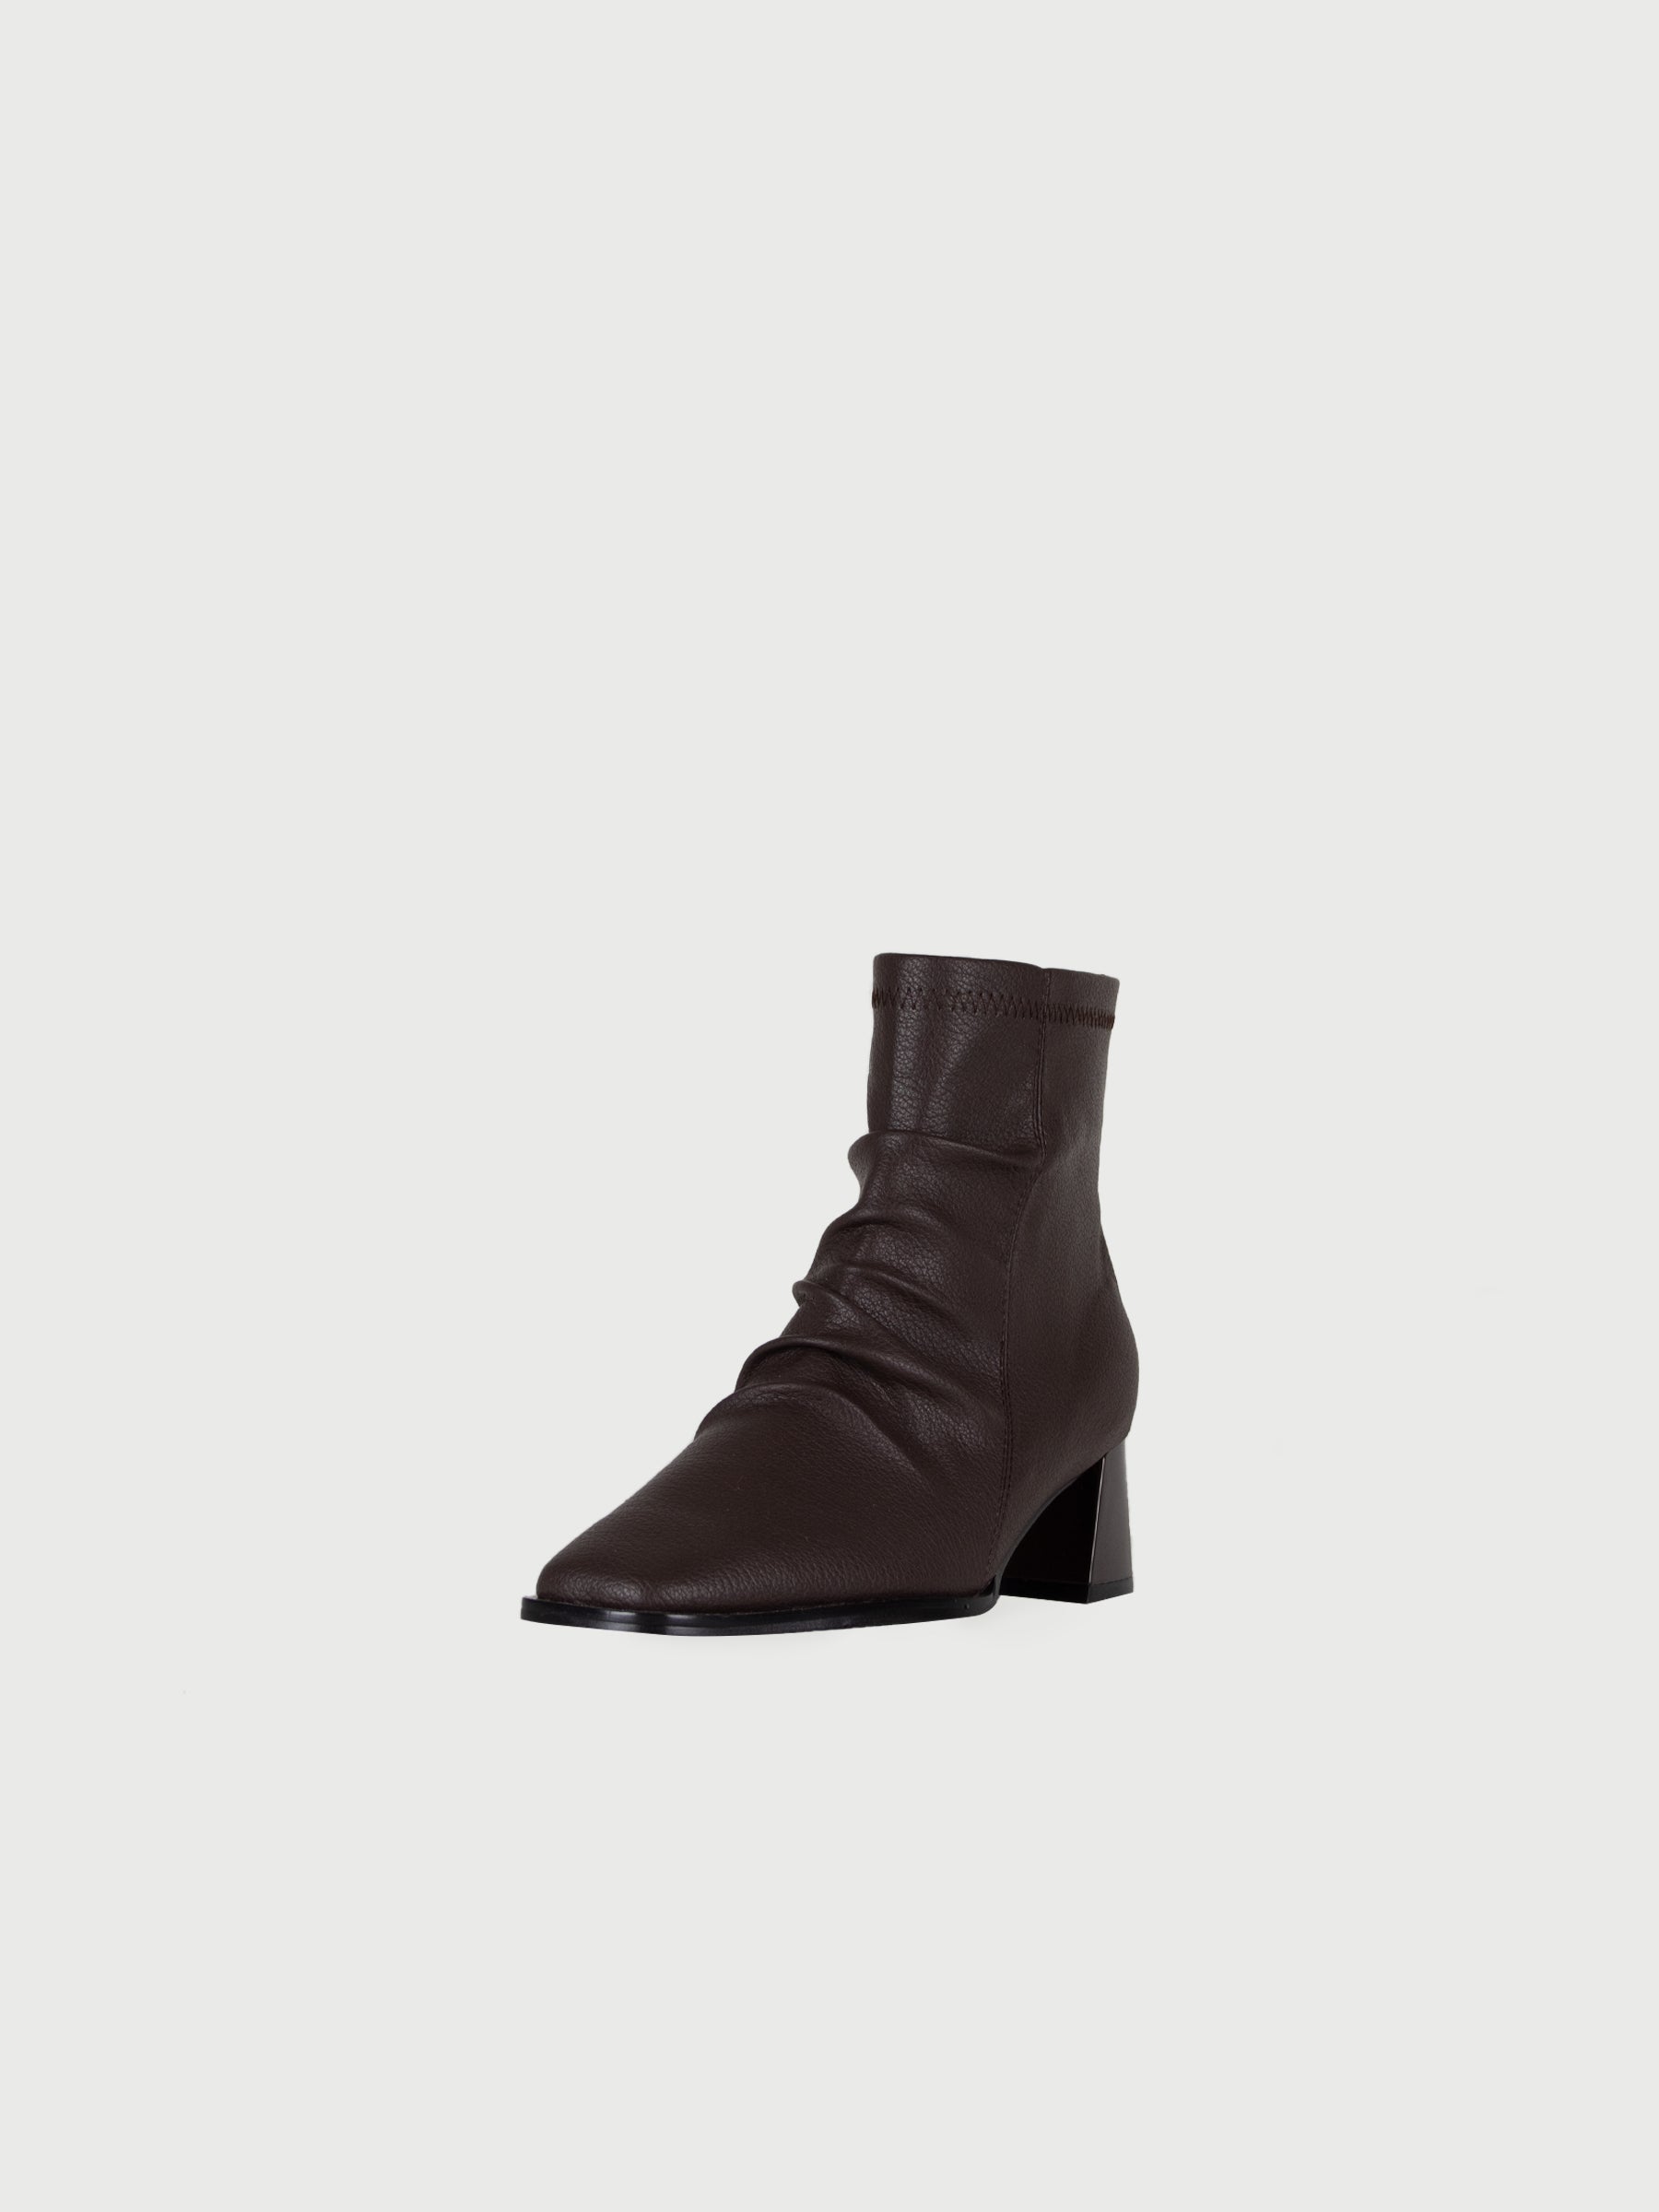 Draped High Heel Leather Boots